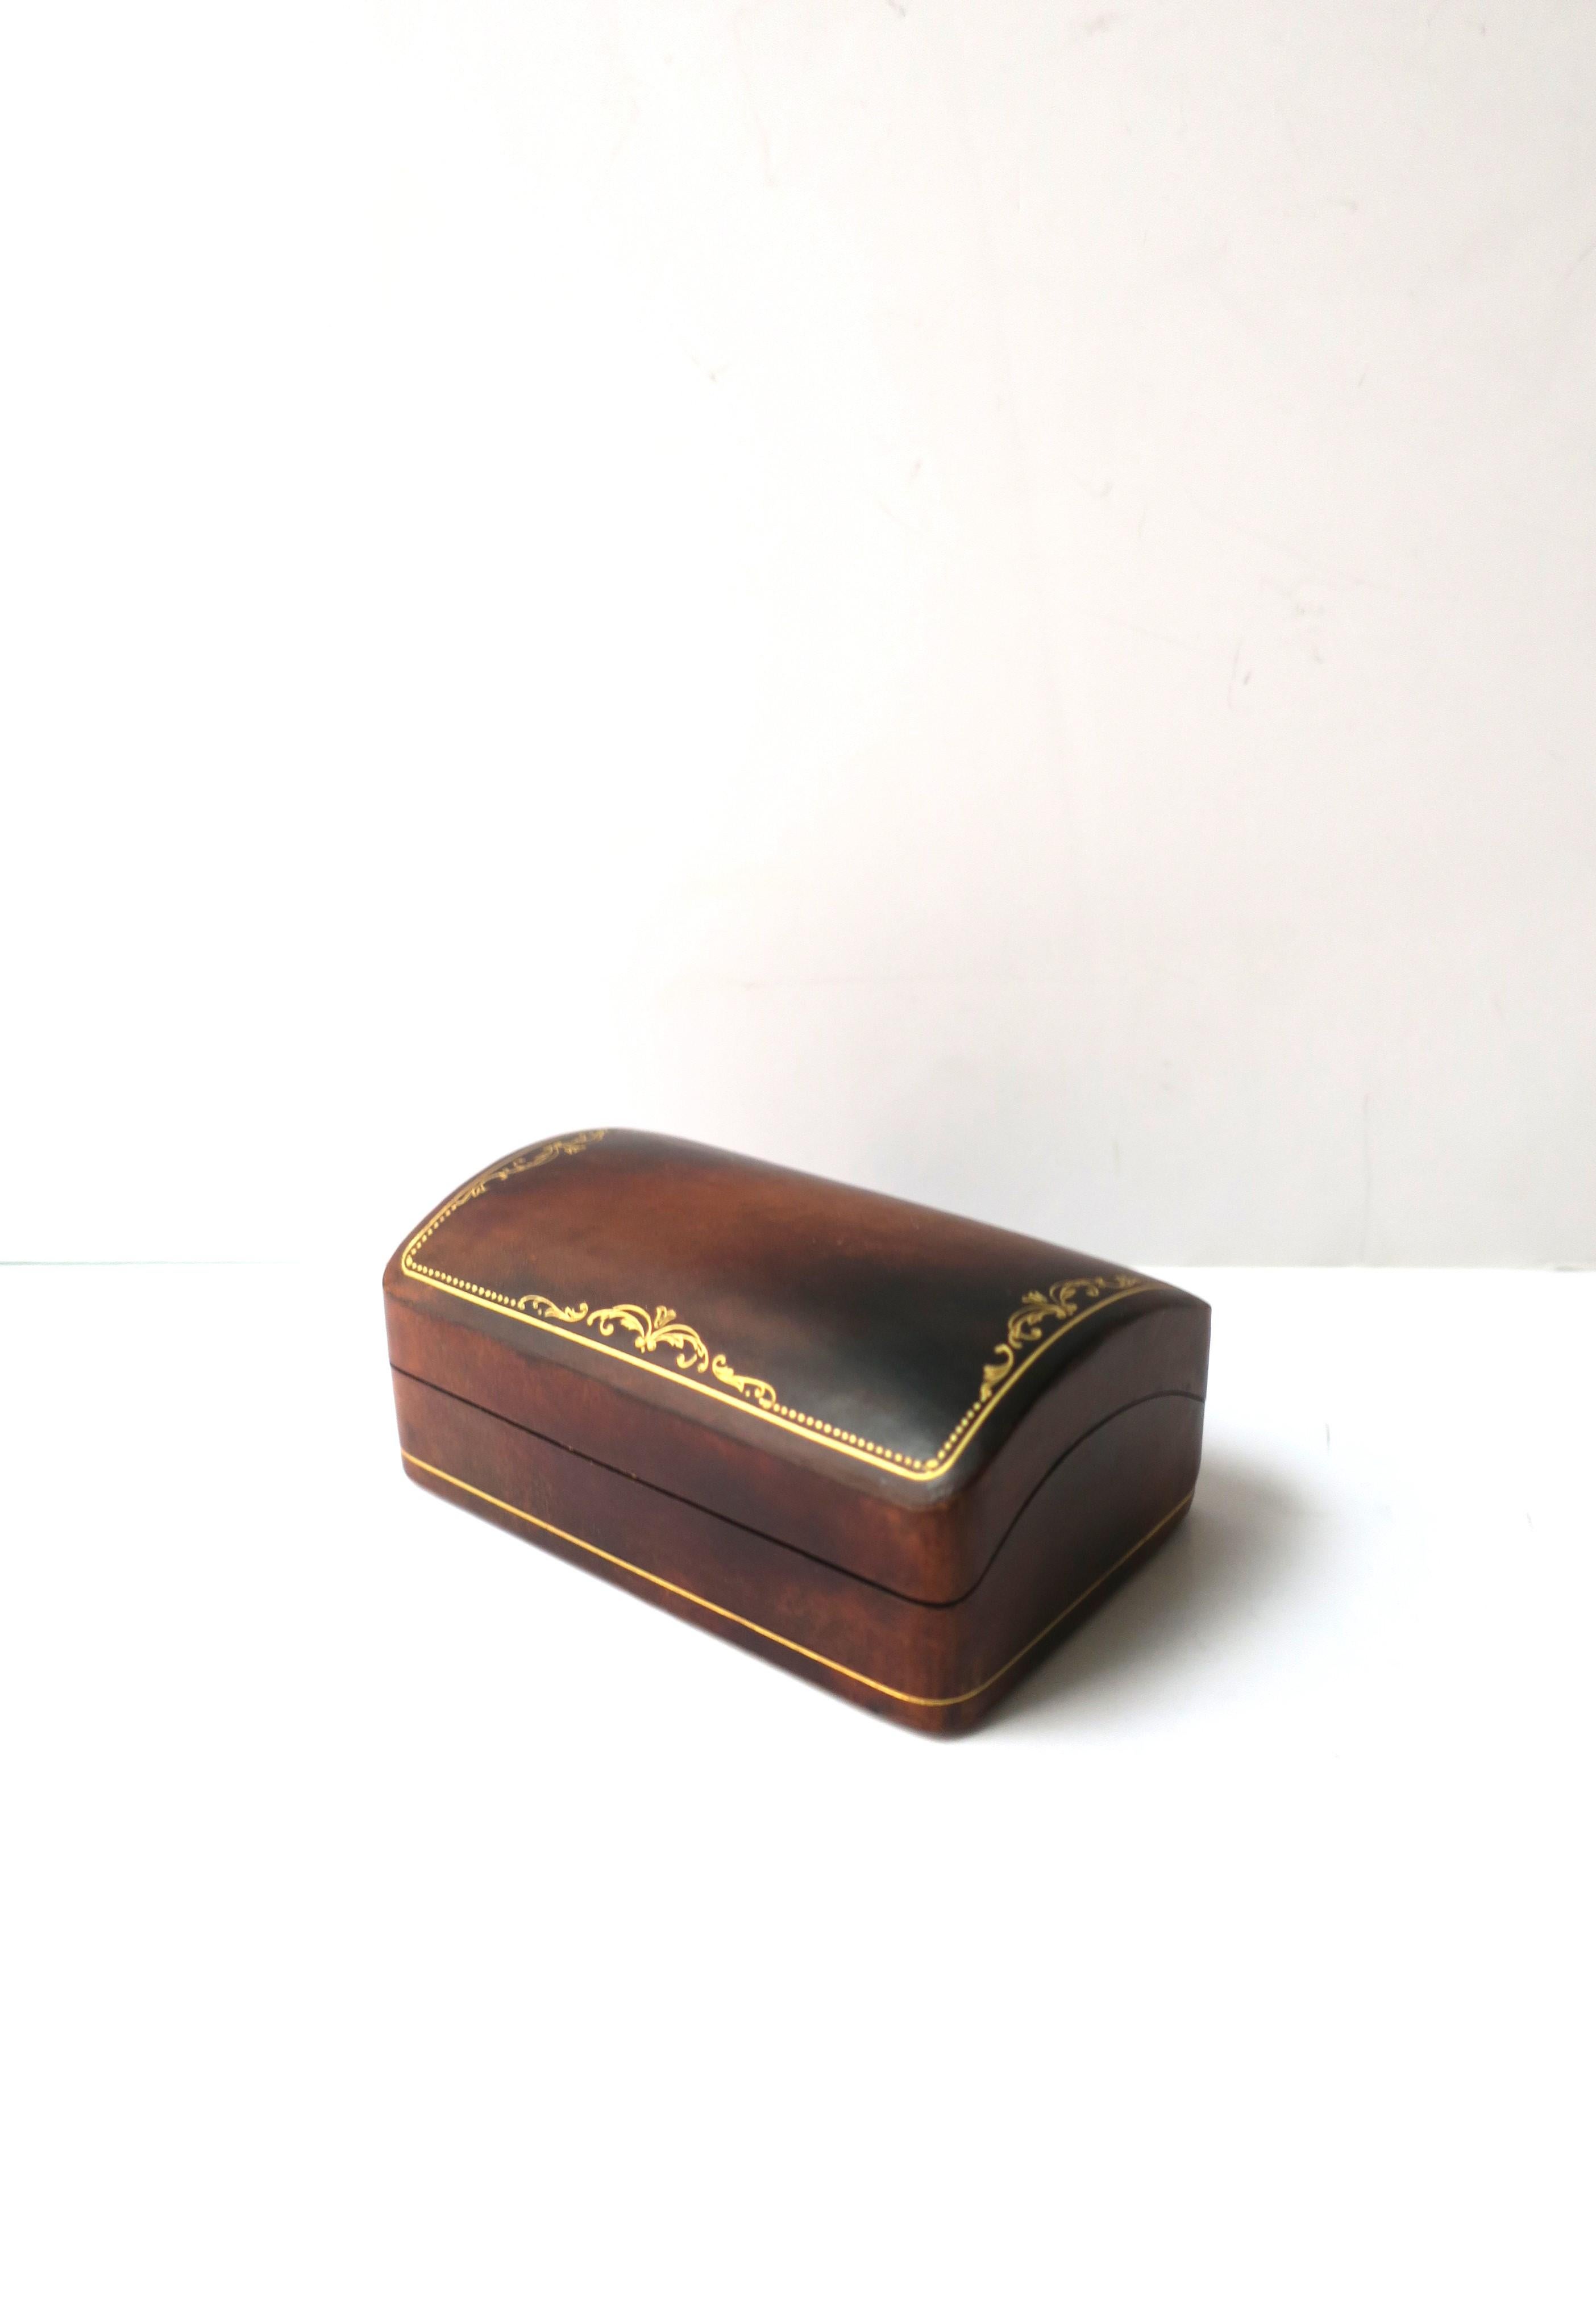 An Italian leather box with gold leaf tooling detail, circa mid-20th century, Italy. Leather is brown with gold tooling detail on top and around exterior edge. A great piece to hold jewelry (demonstrated) or small items on a desk, vanity area,